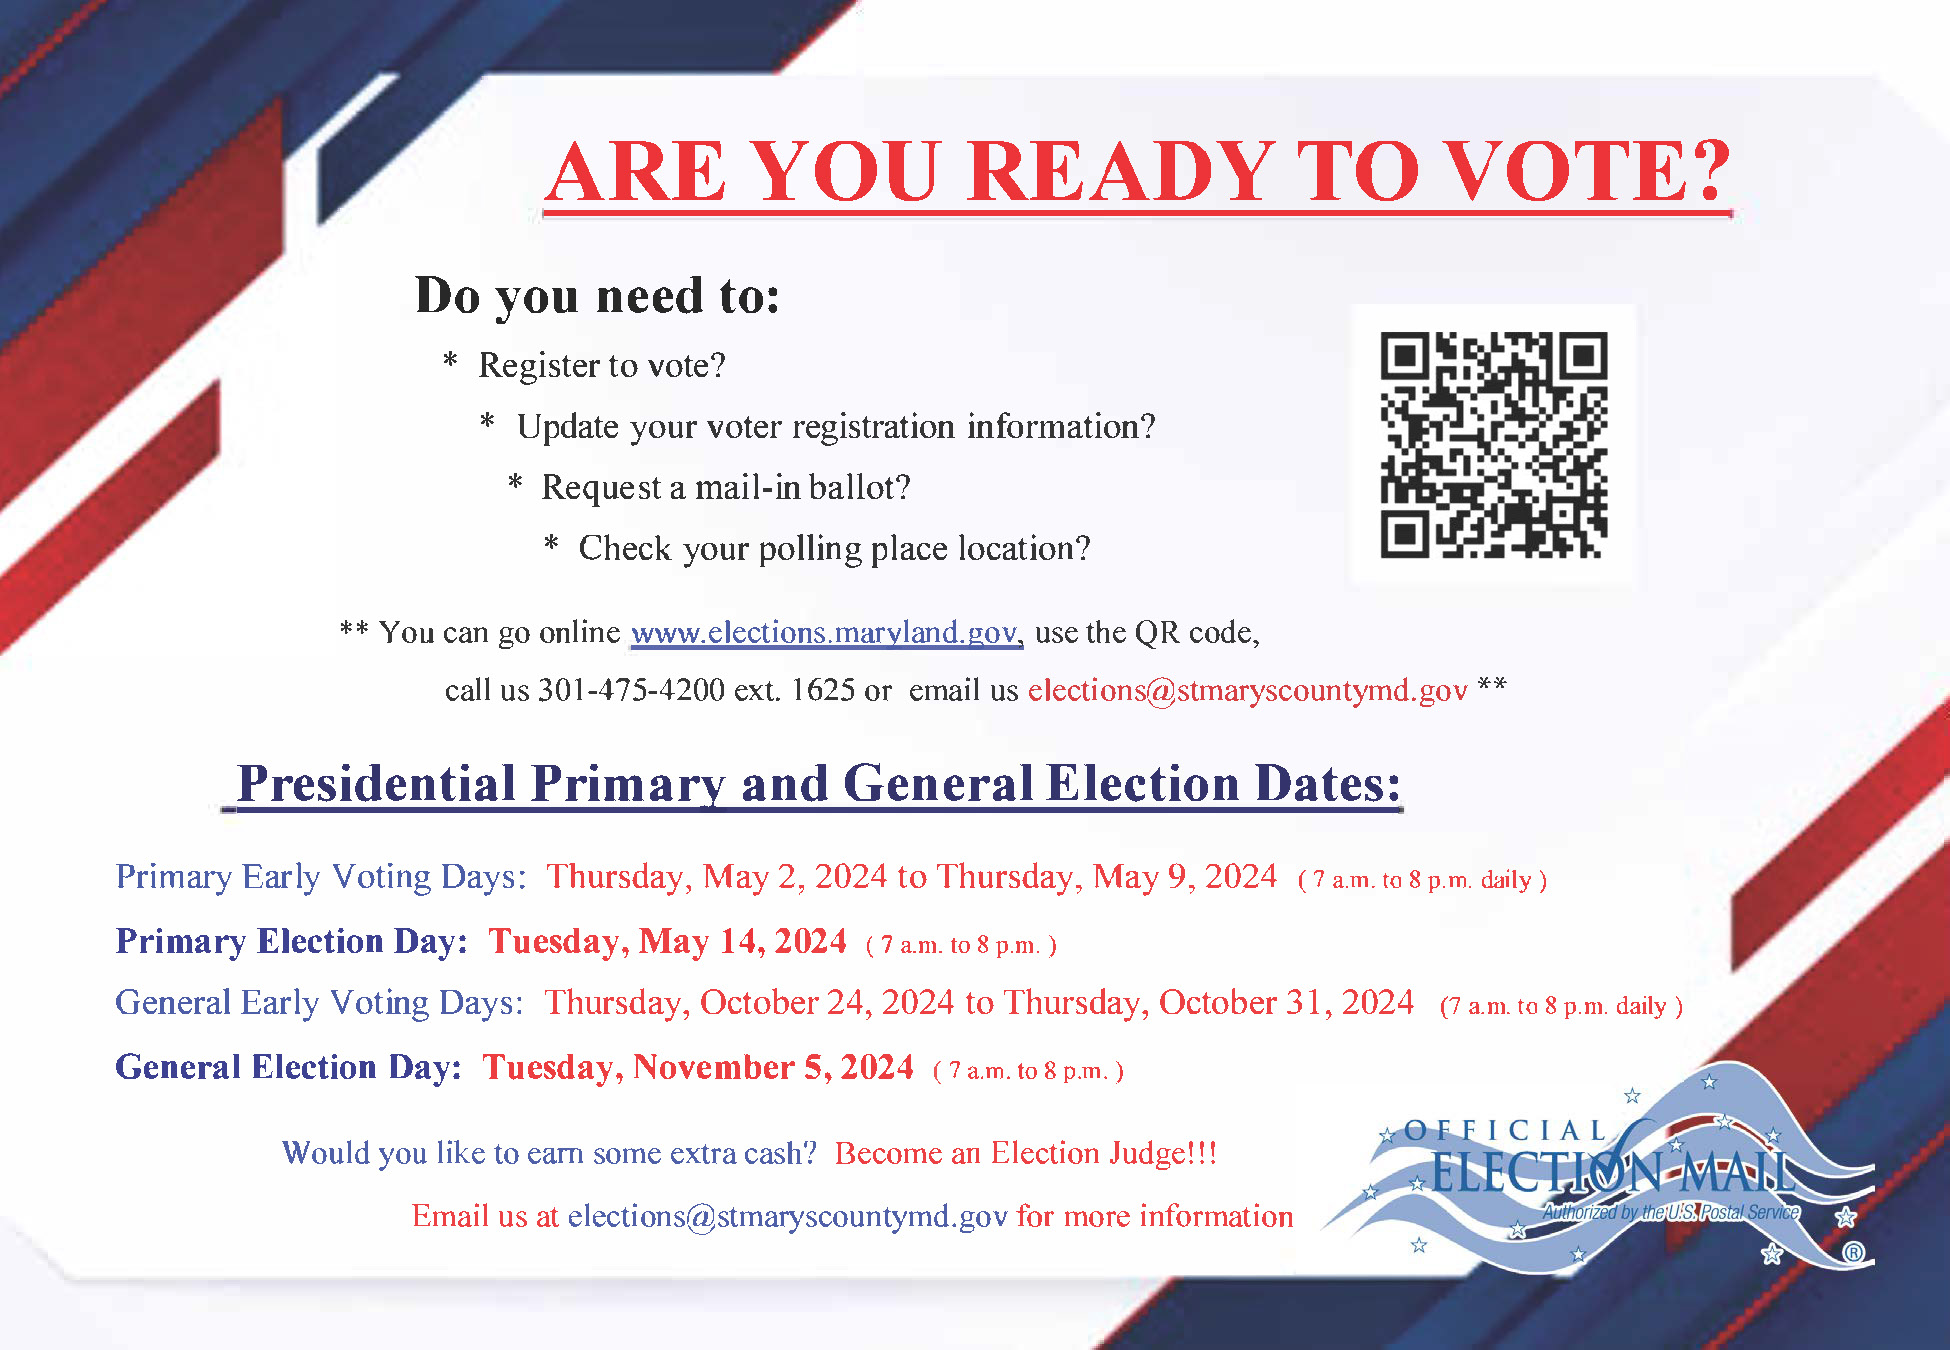 Primary Early Voting Days: 05/02/2024 to 05/09/2024. Primary Election Day: 05/14/2024. General Early Voting Days: 10/24/2024. General Election Day: 11/05/2024.